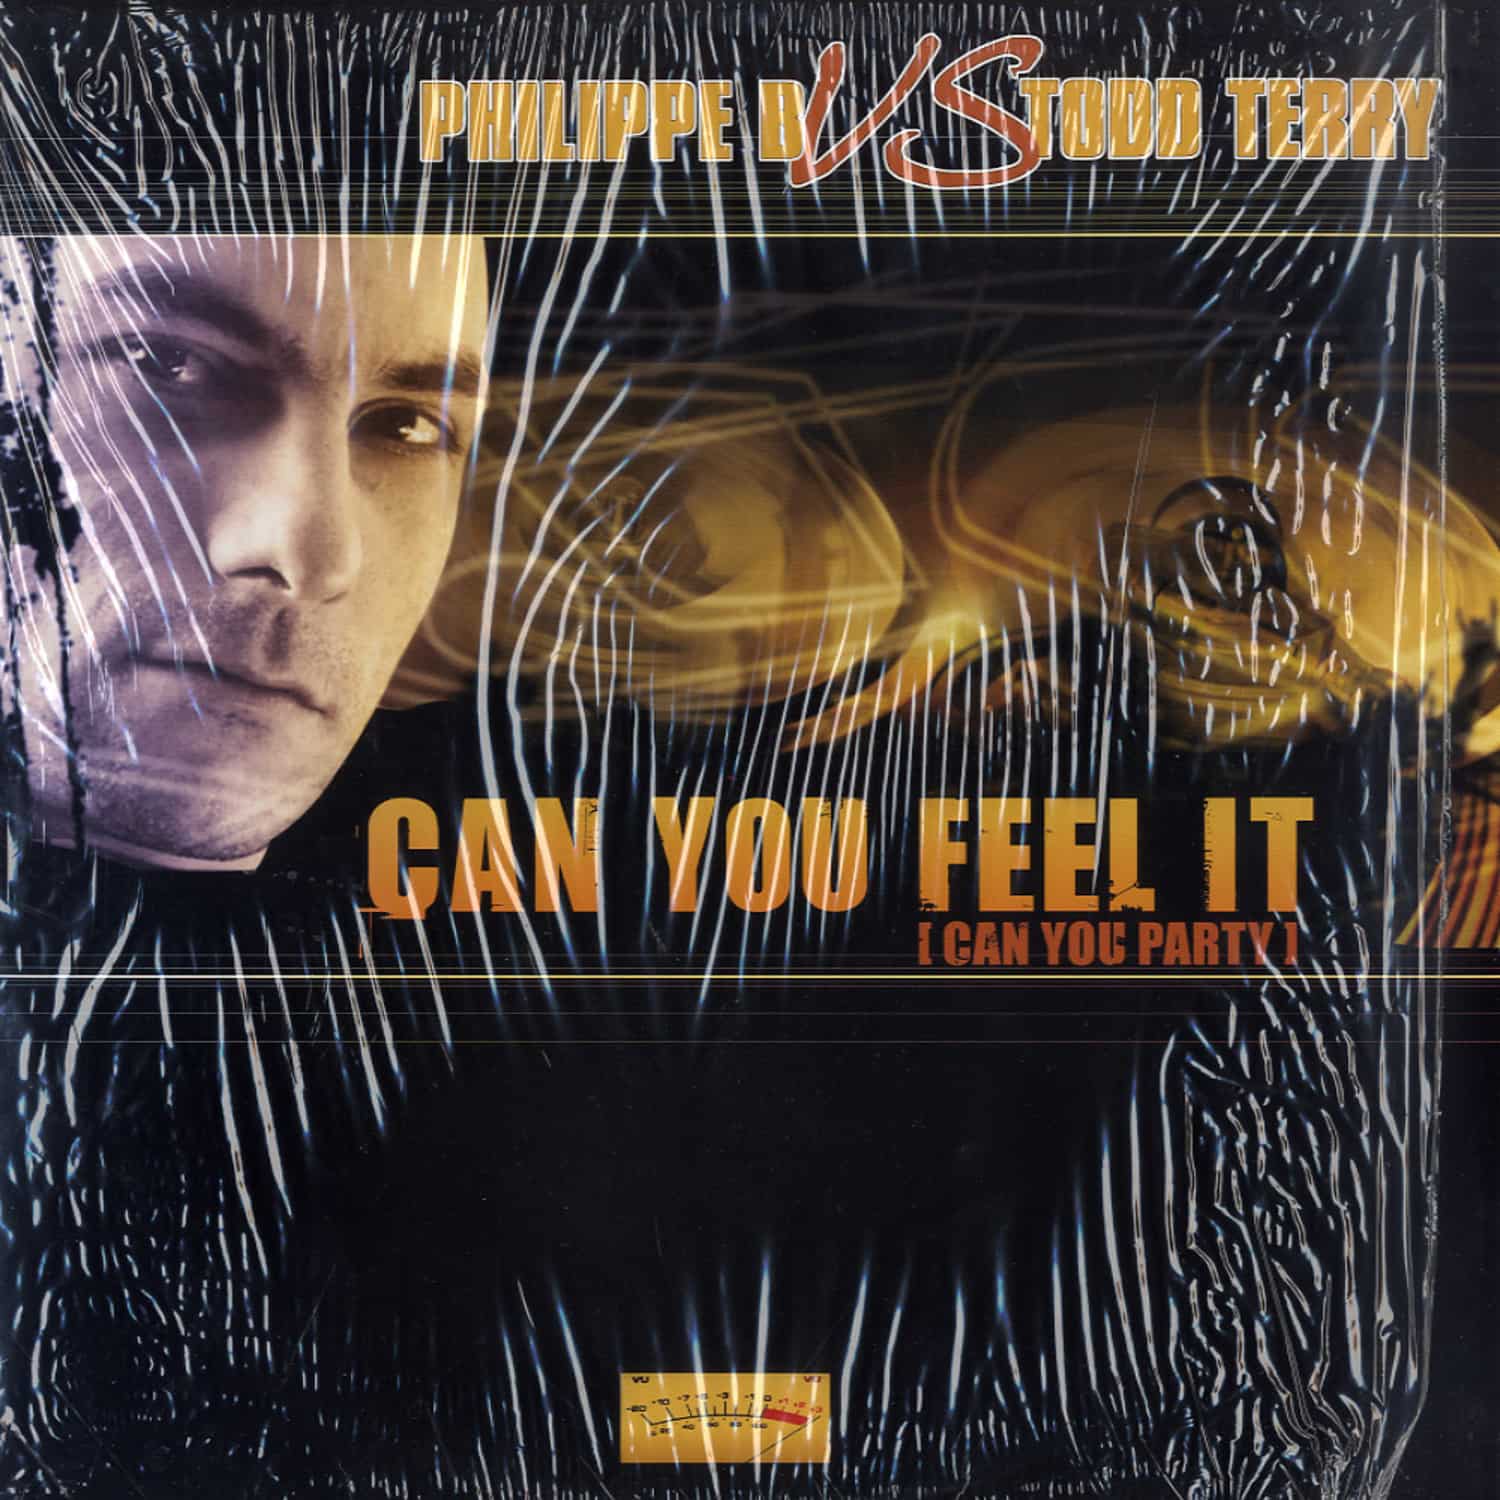 Philippe B vs Todd Terry - CAN YOU FEEL IT